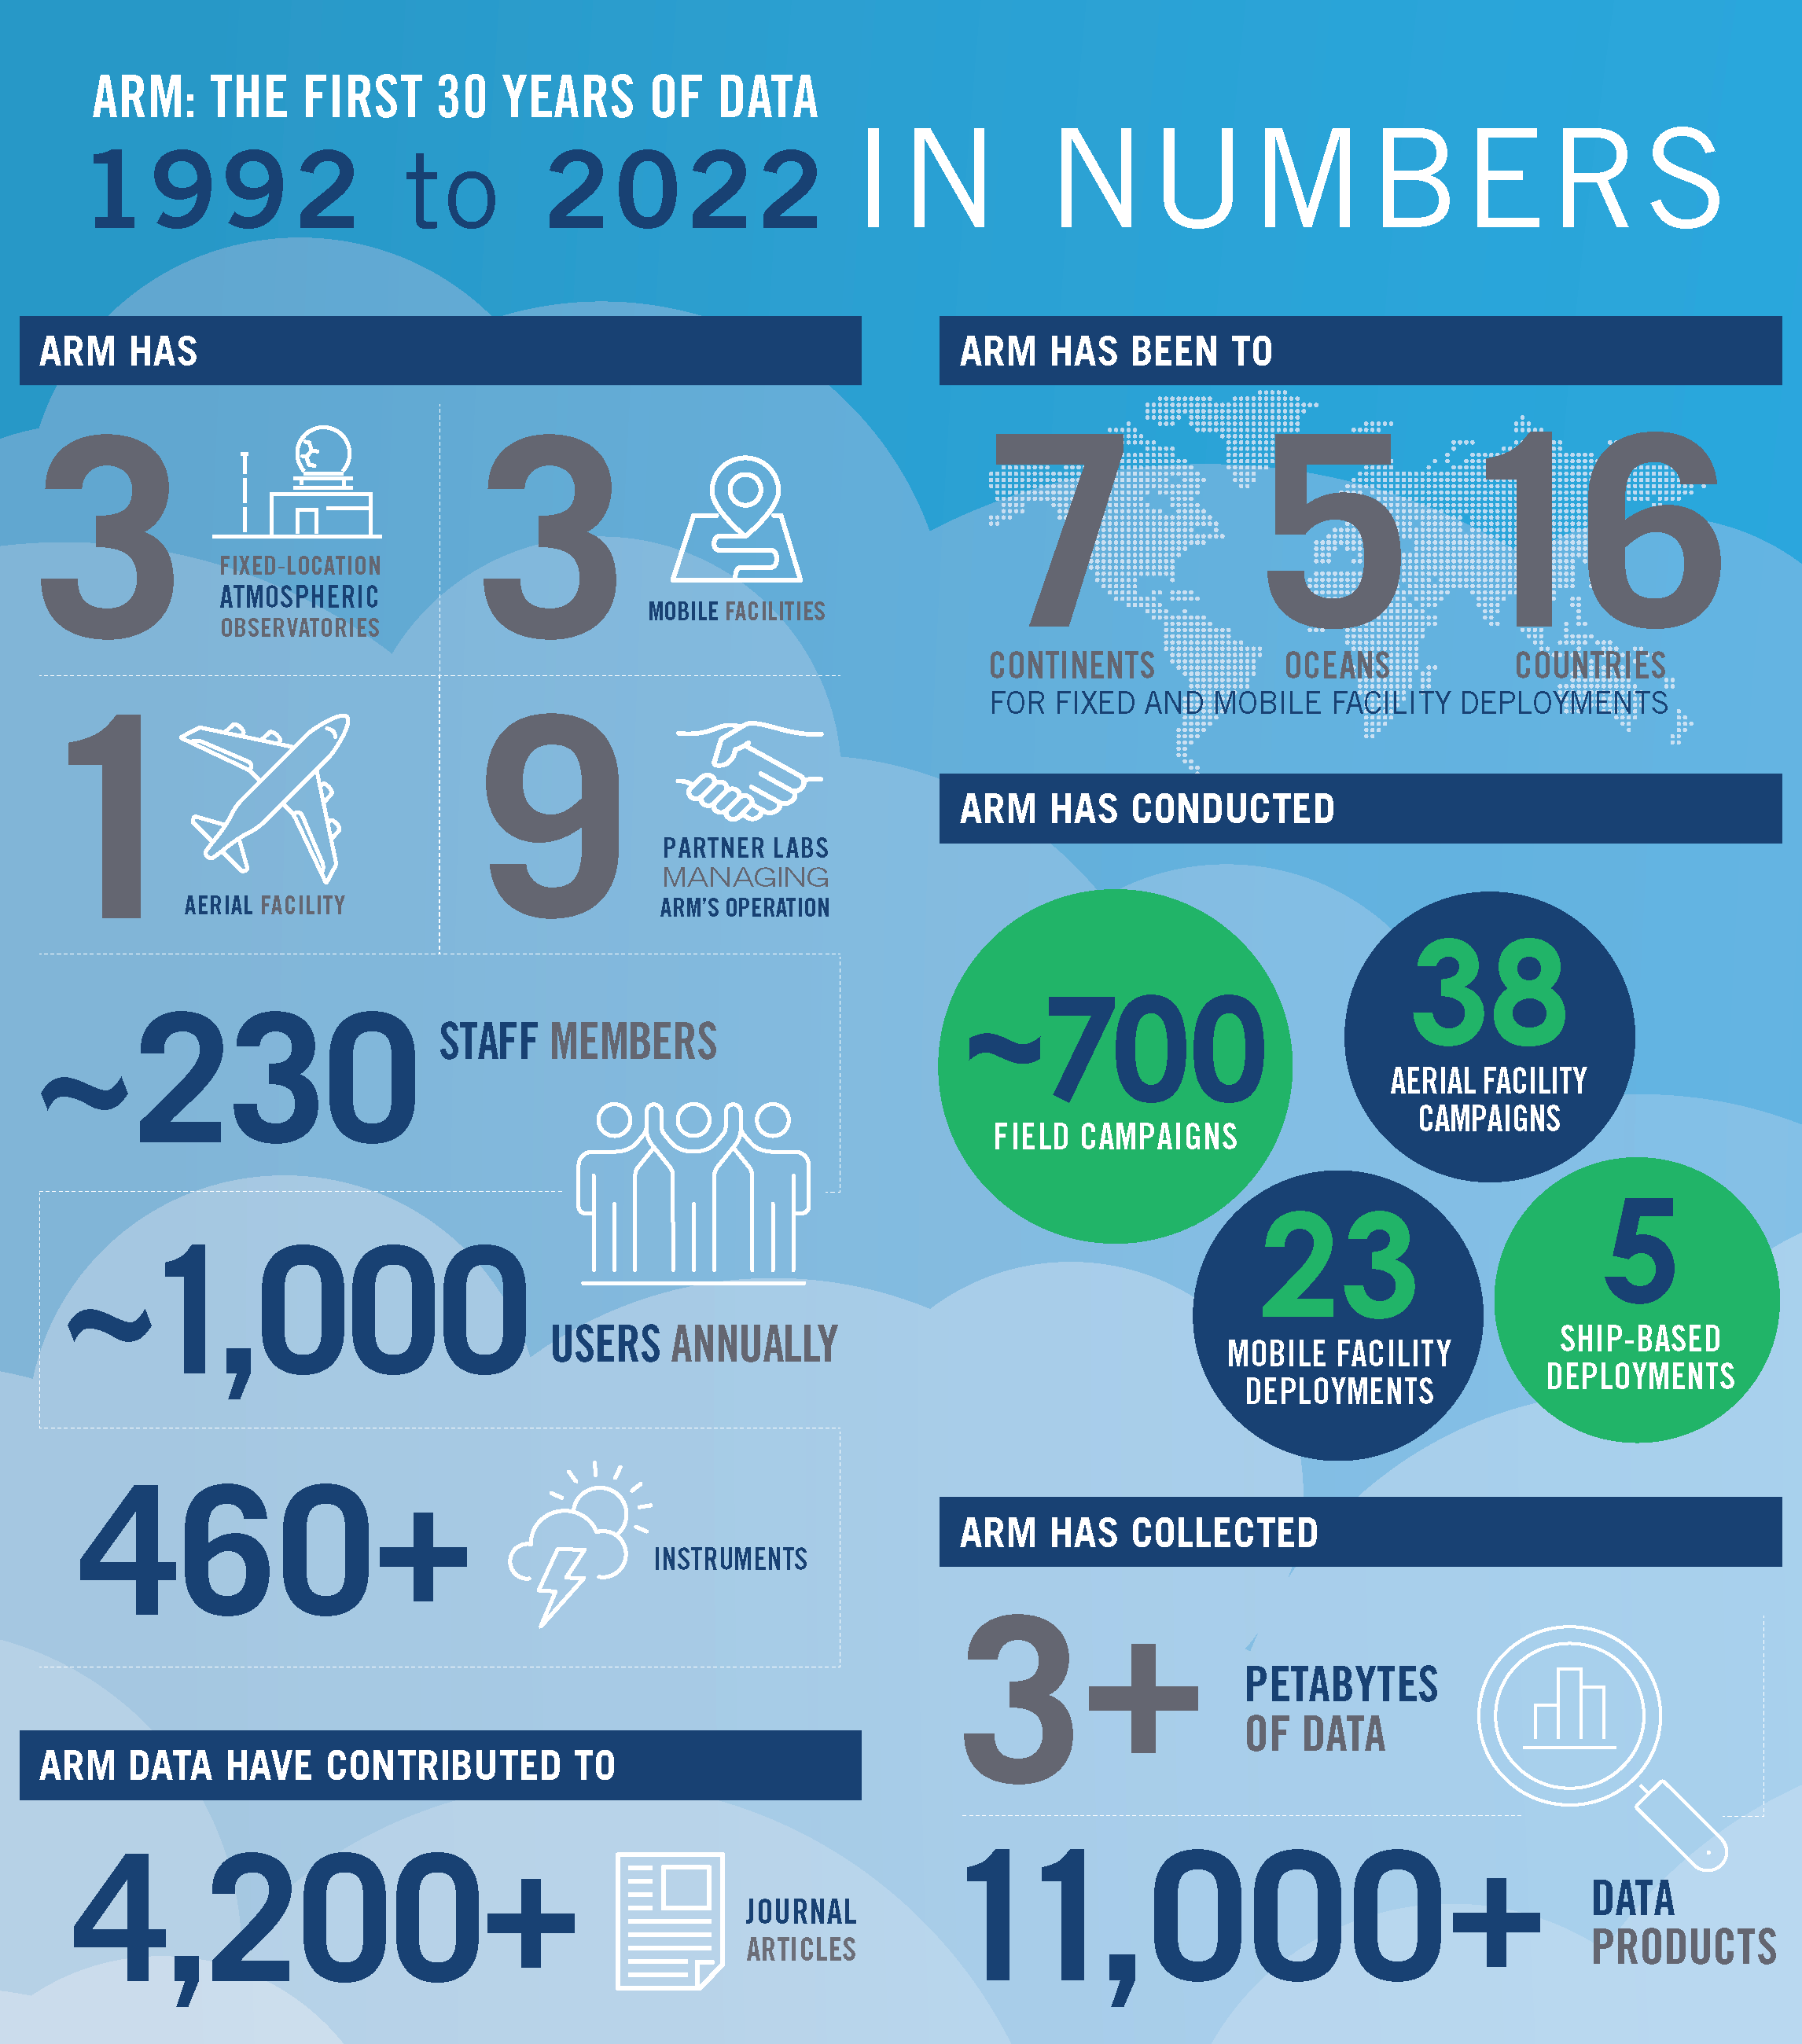 An infographic showing ARM data by the numbers from 1992 to 2022, including 3 fixed observatories, 3 mobile observatories, 1 aerial facility, 9 labs managing operations, more than 700 campaigns, 3-plus petabytes of data, 11,000-plus data products, and more than 4,200 publications citing ARM data.